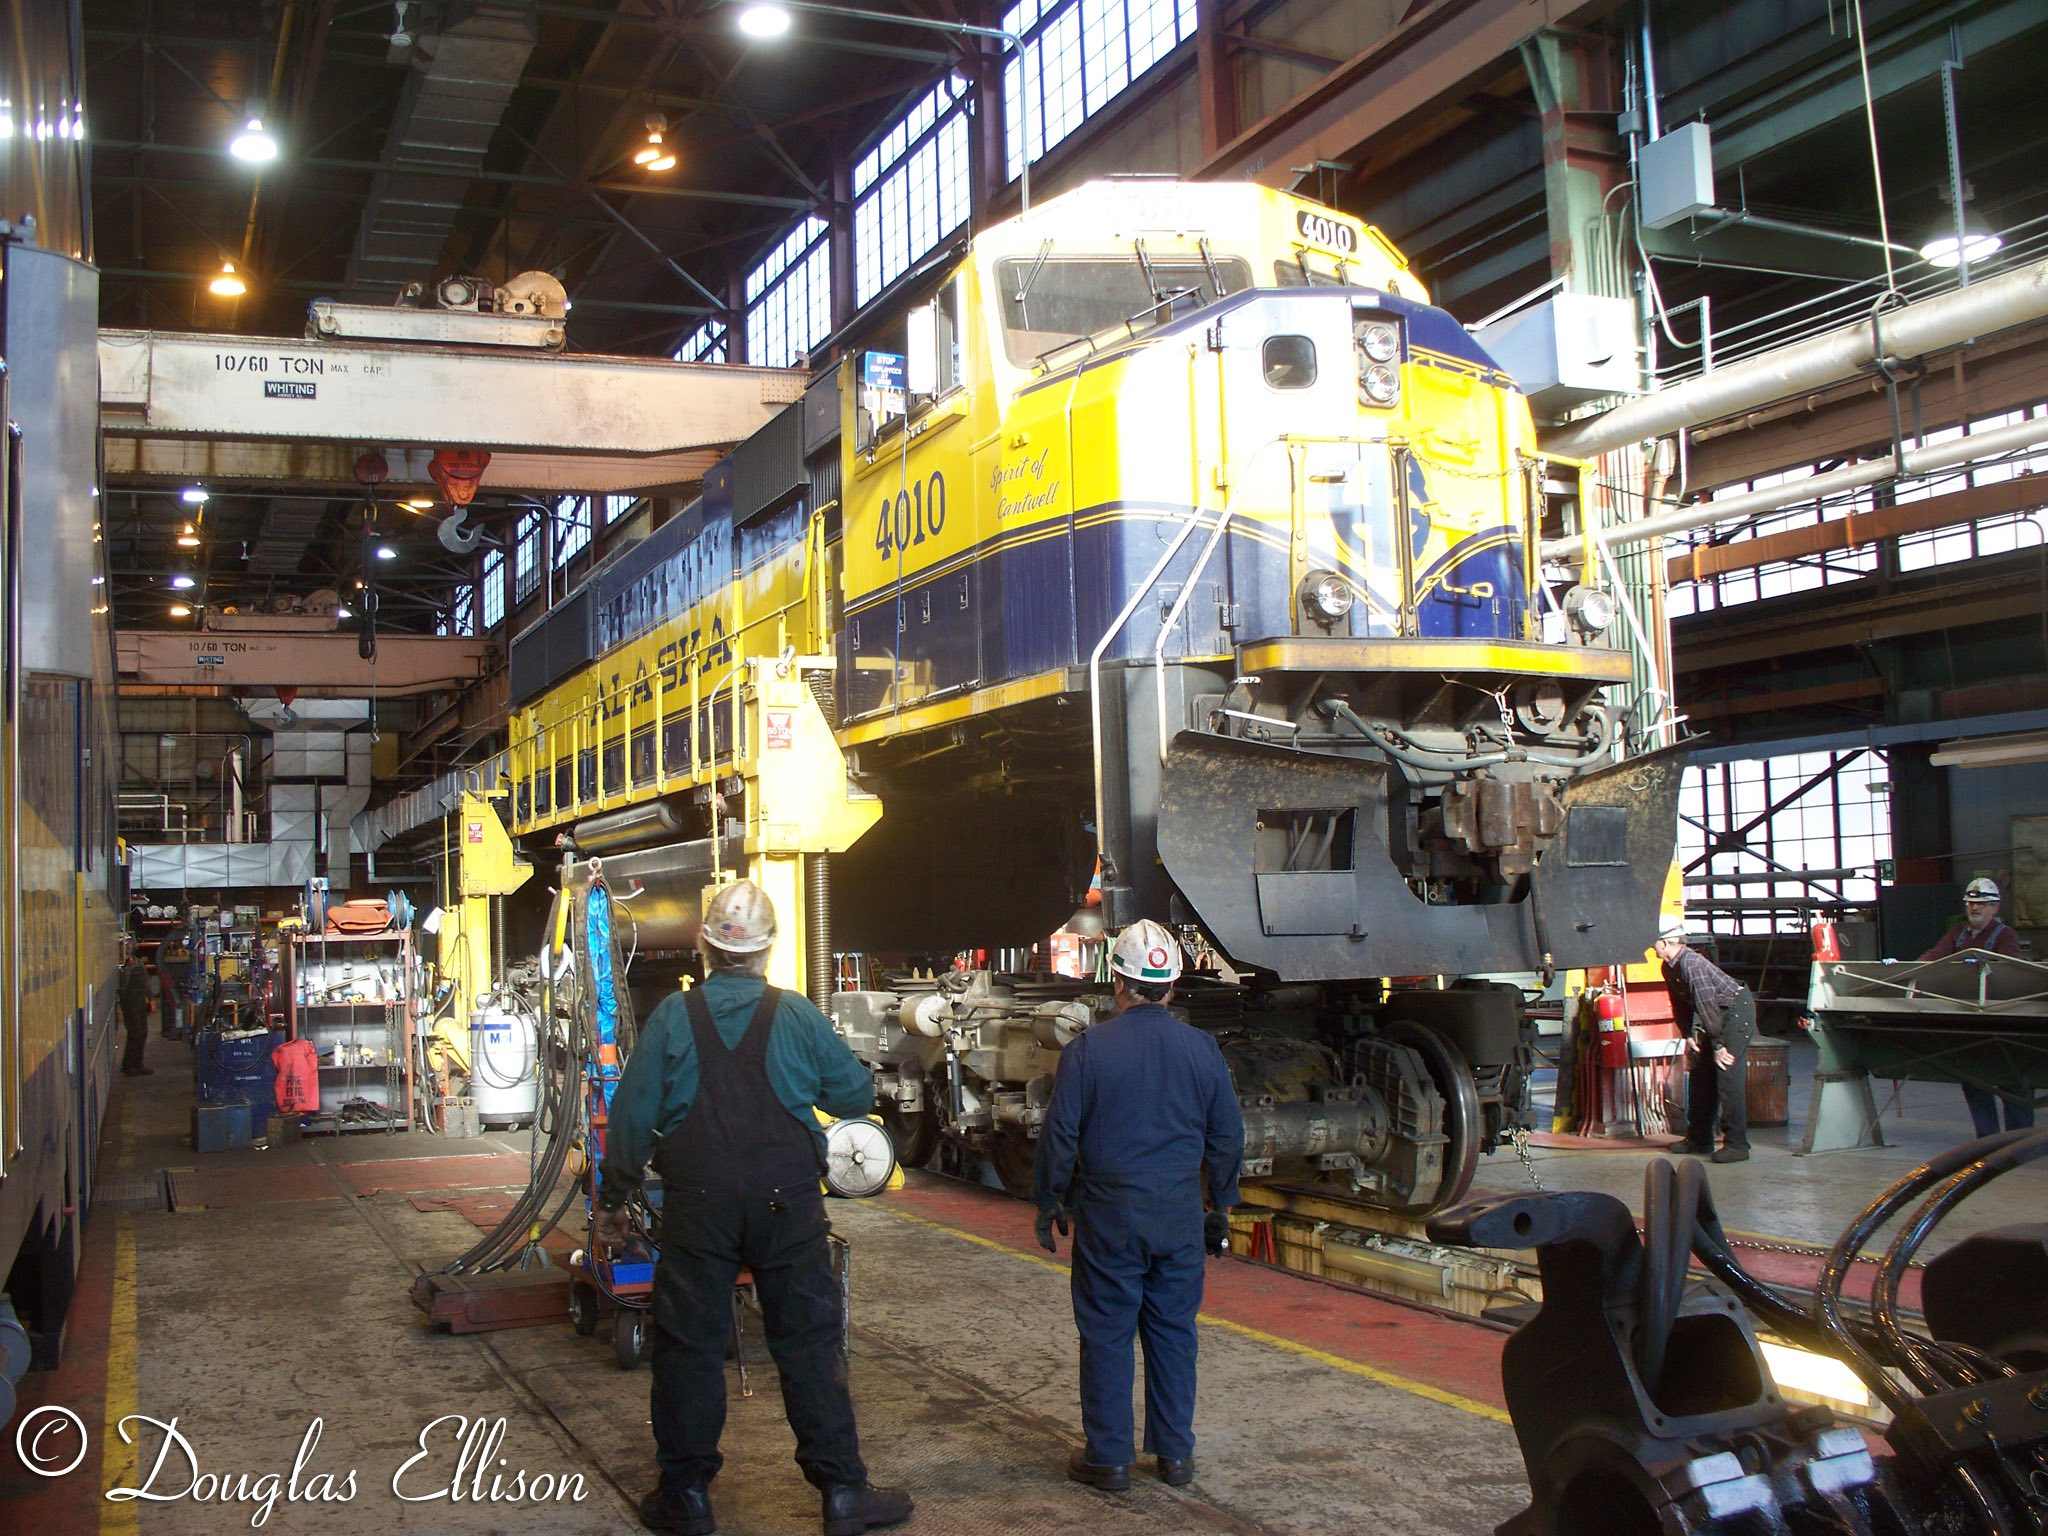 Lifting the 4010 for truck overhaul May 2009